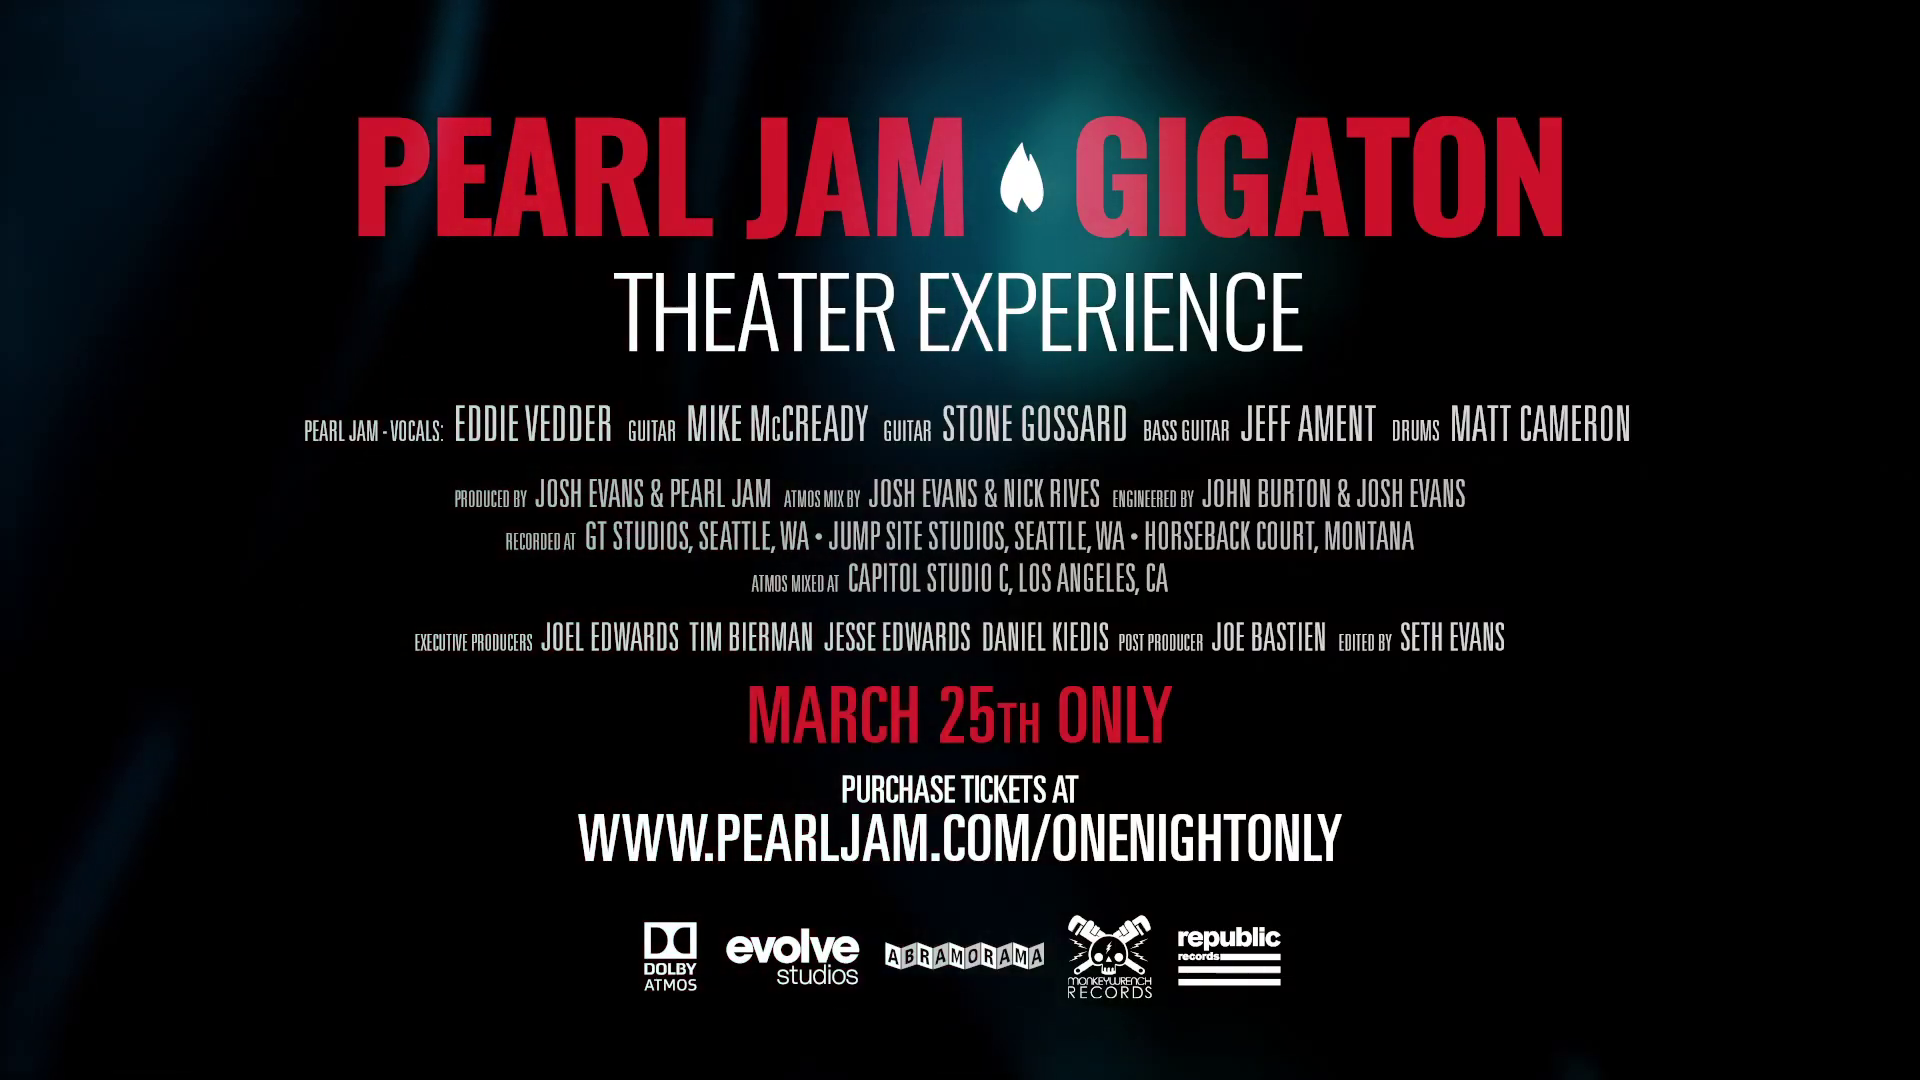 Pearl Jam's Gigaton in Dolby Atmos Truly Unique Listening